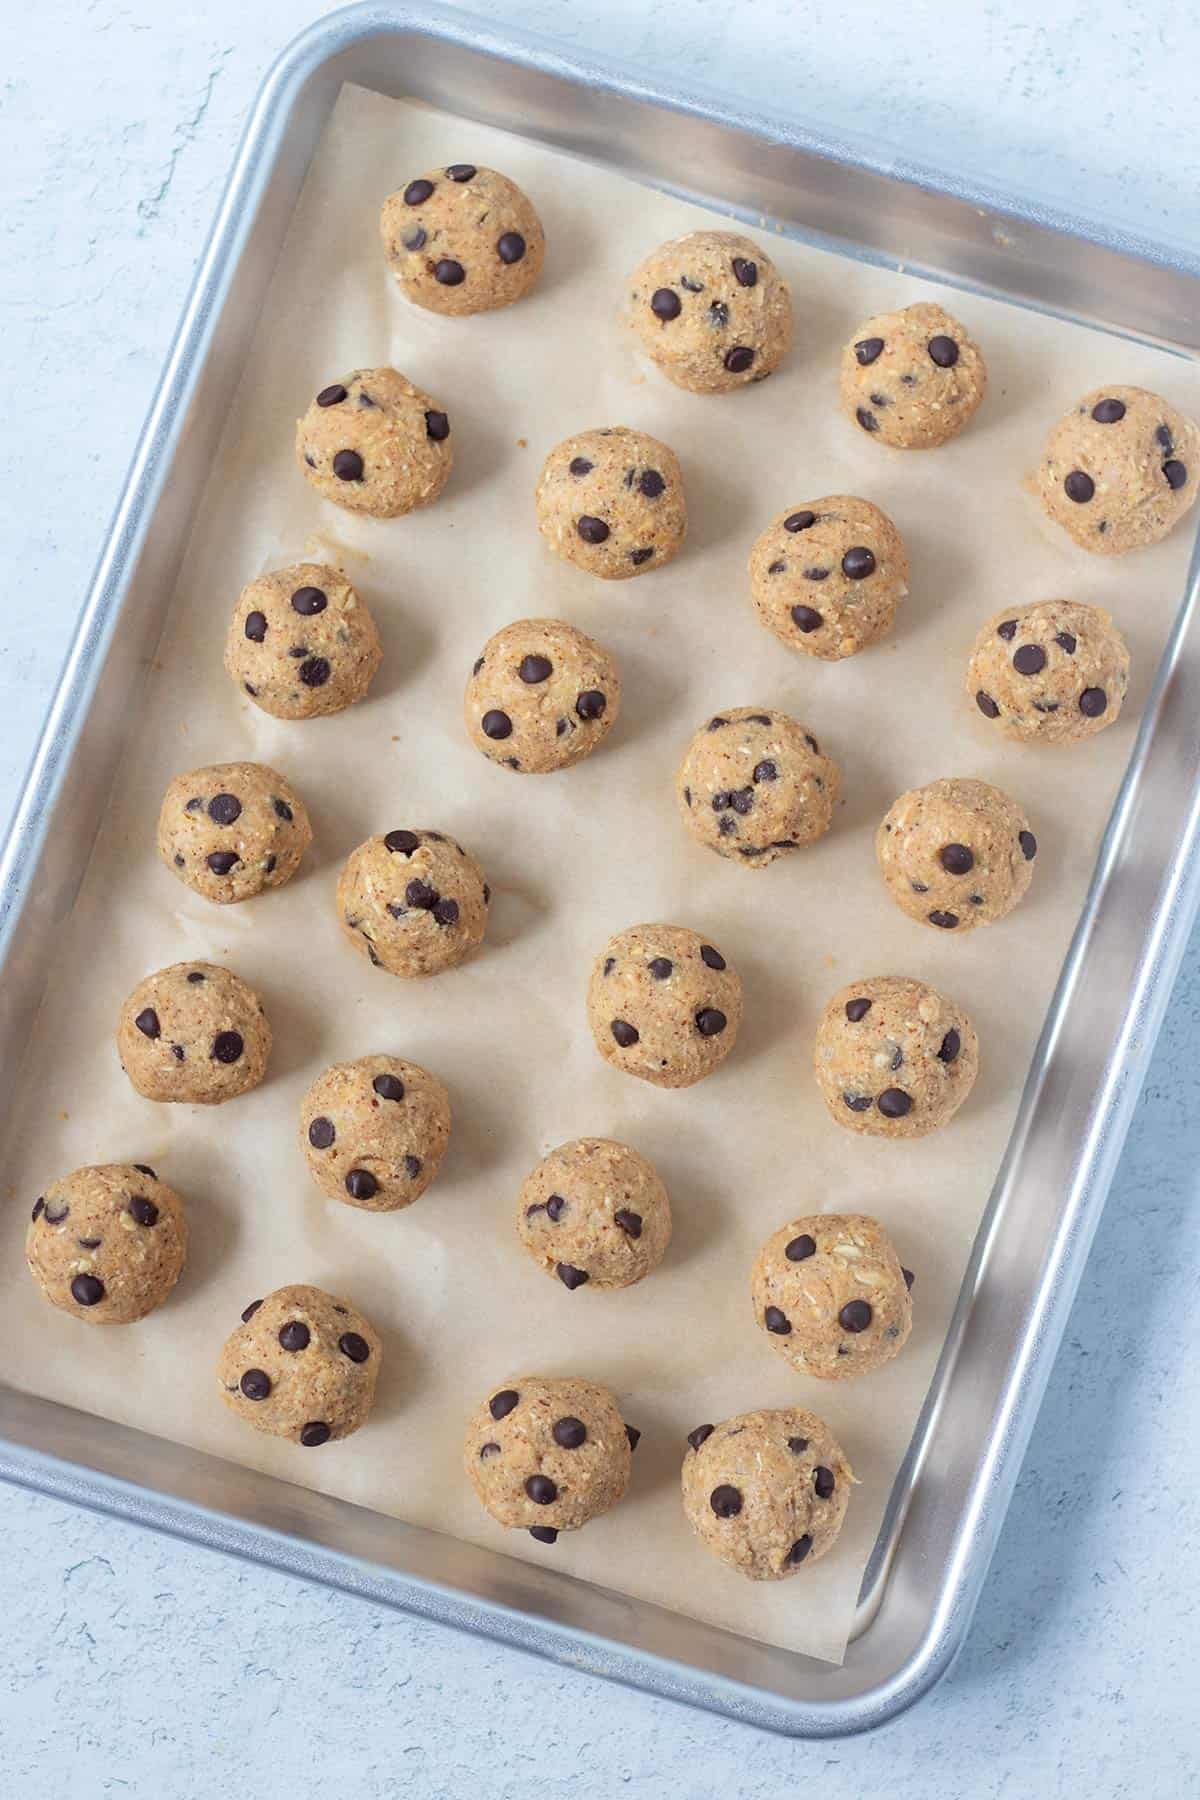 chickpea cookie dough bites rolled into balls with mini chocolate chips. cookie dough balls are on a parchment lined baking tray.